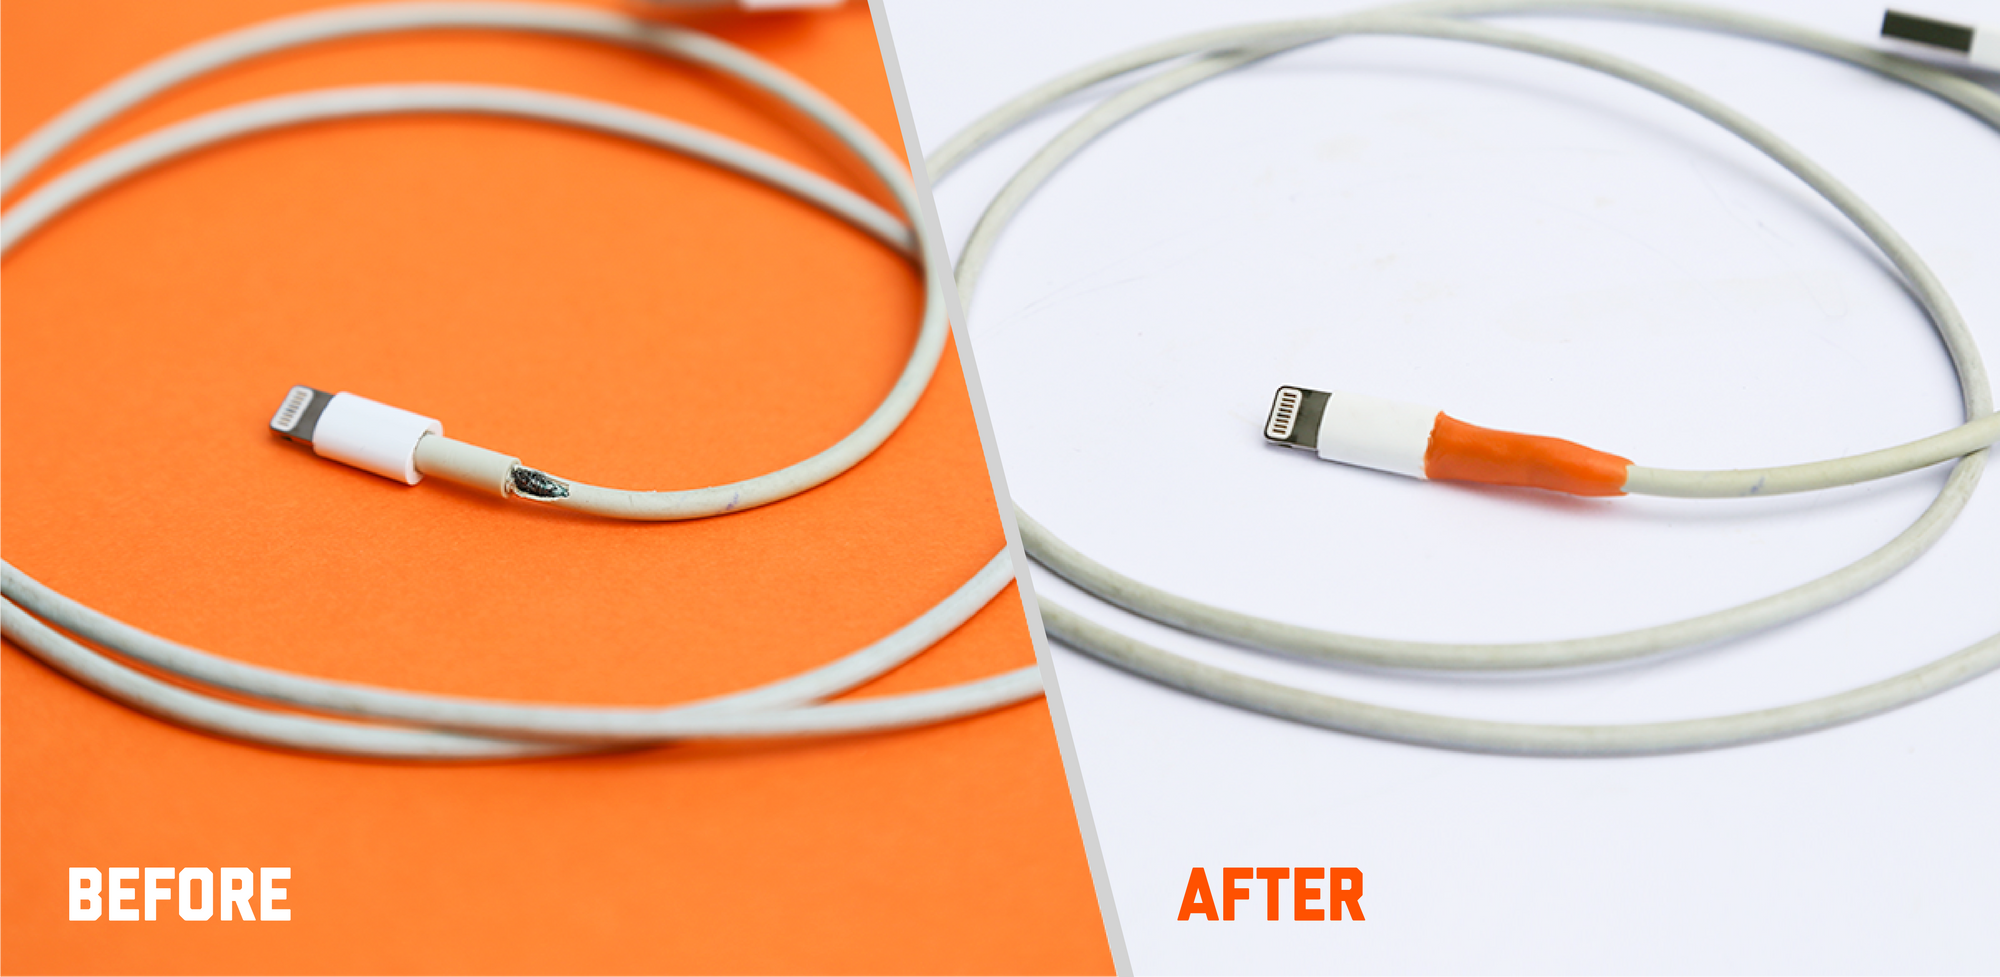 How to repair iphone charging cable